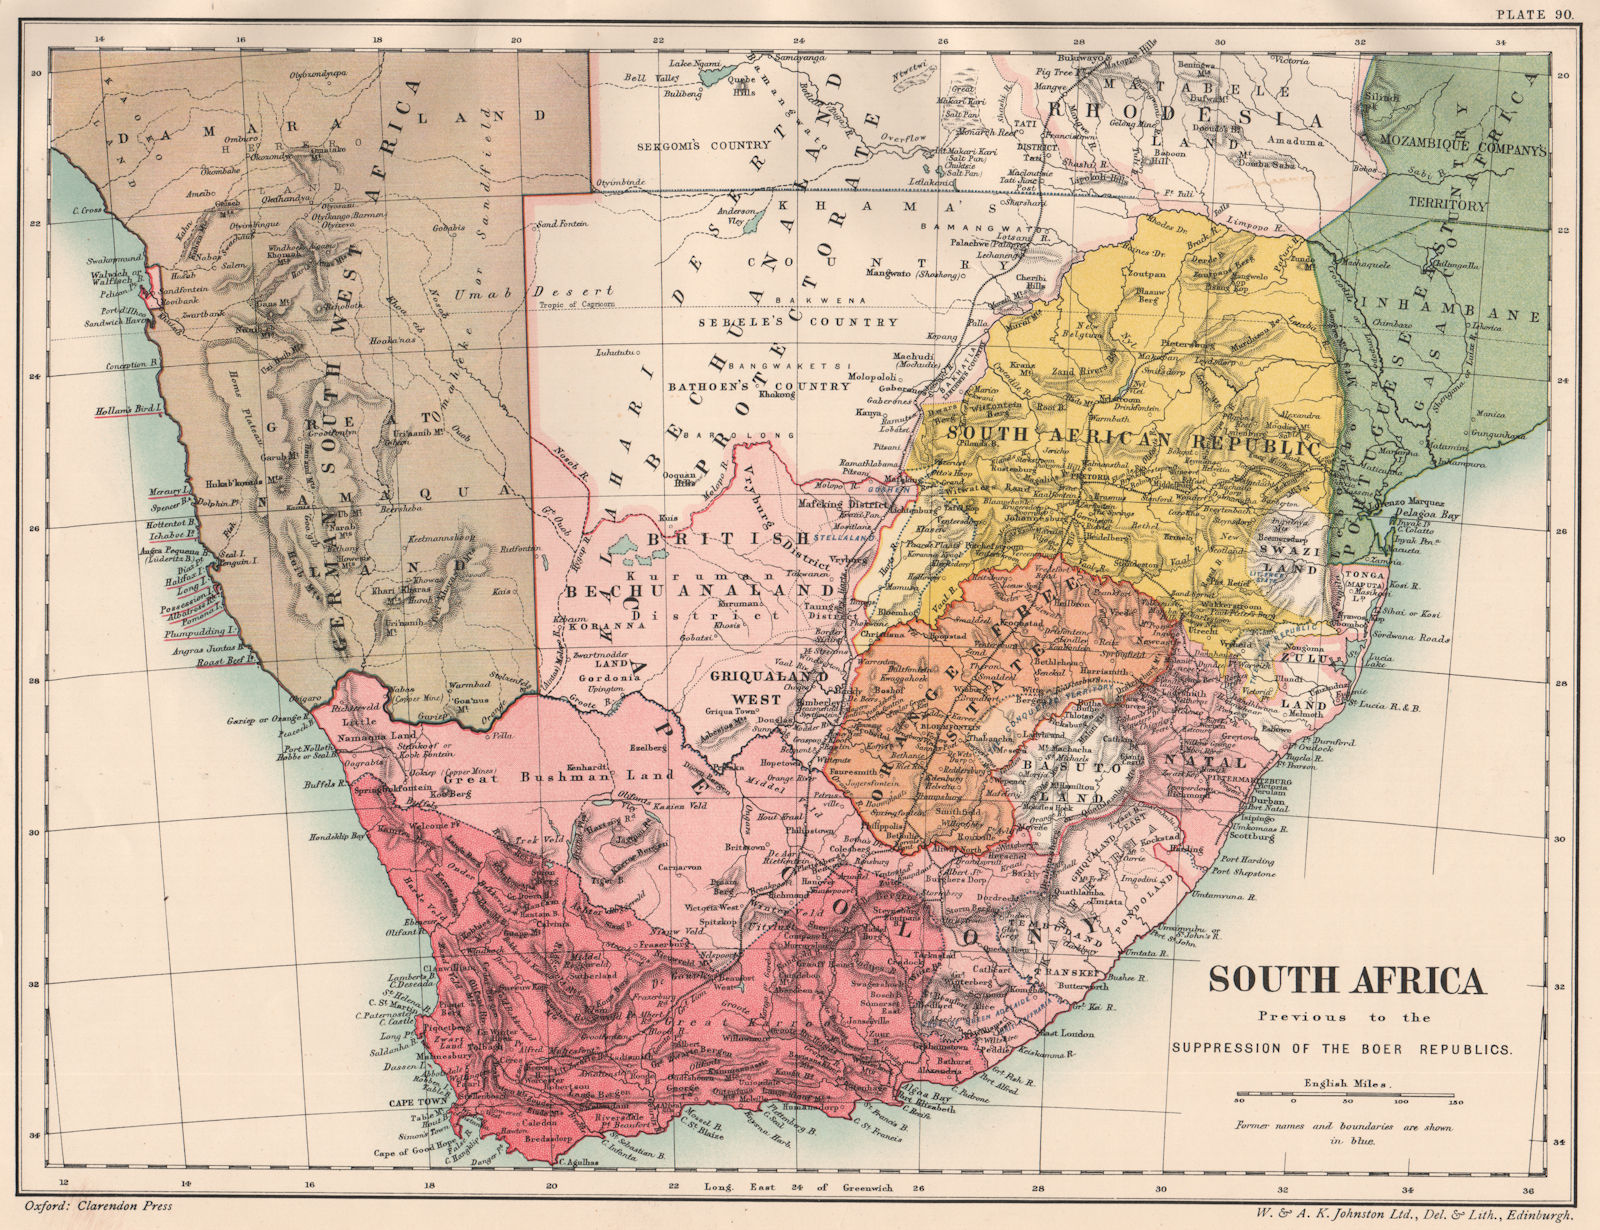 SOUTH AFRICA. Before the Boer wars & suppression of the Boer states 1902 map